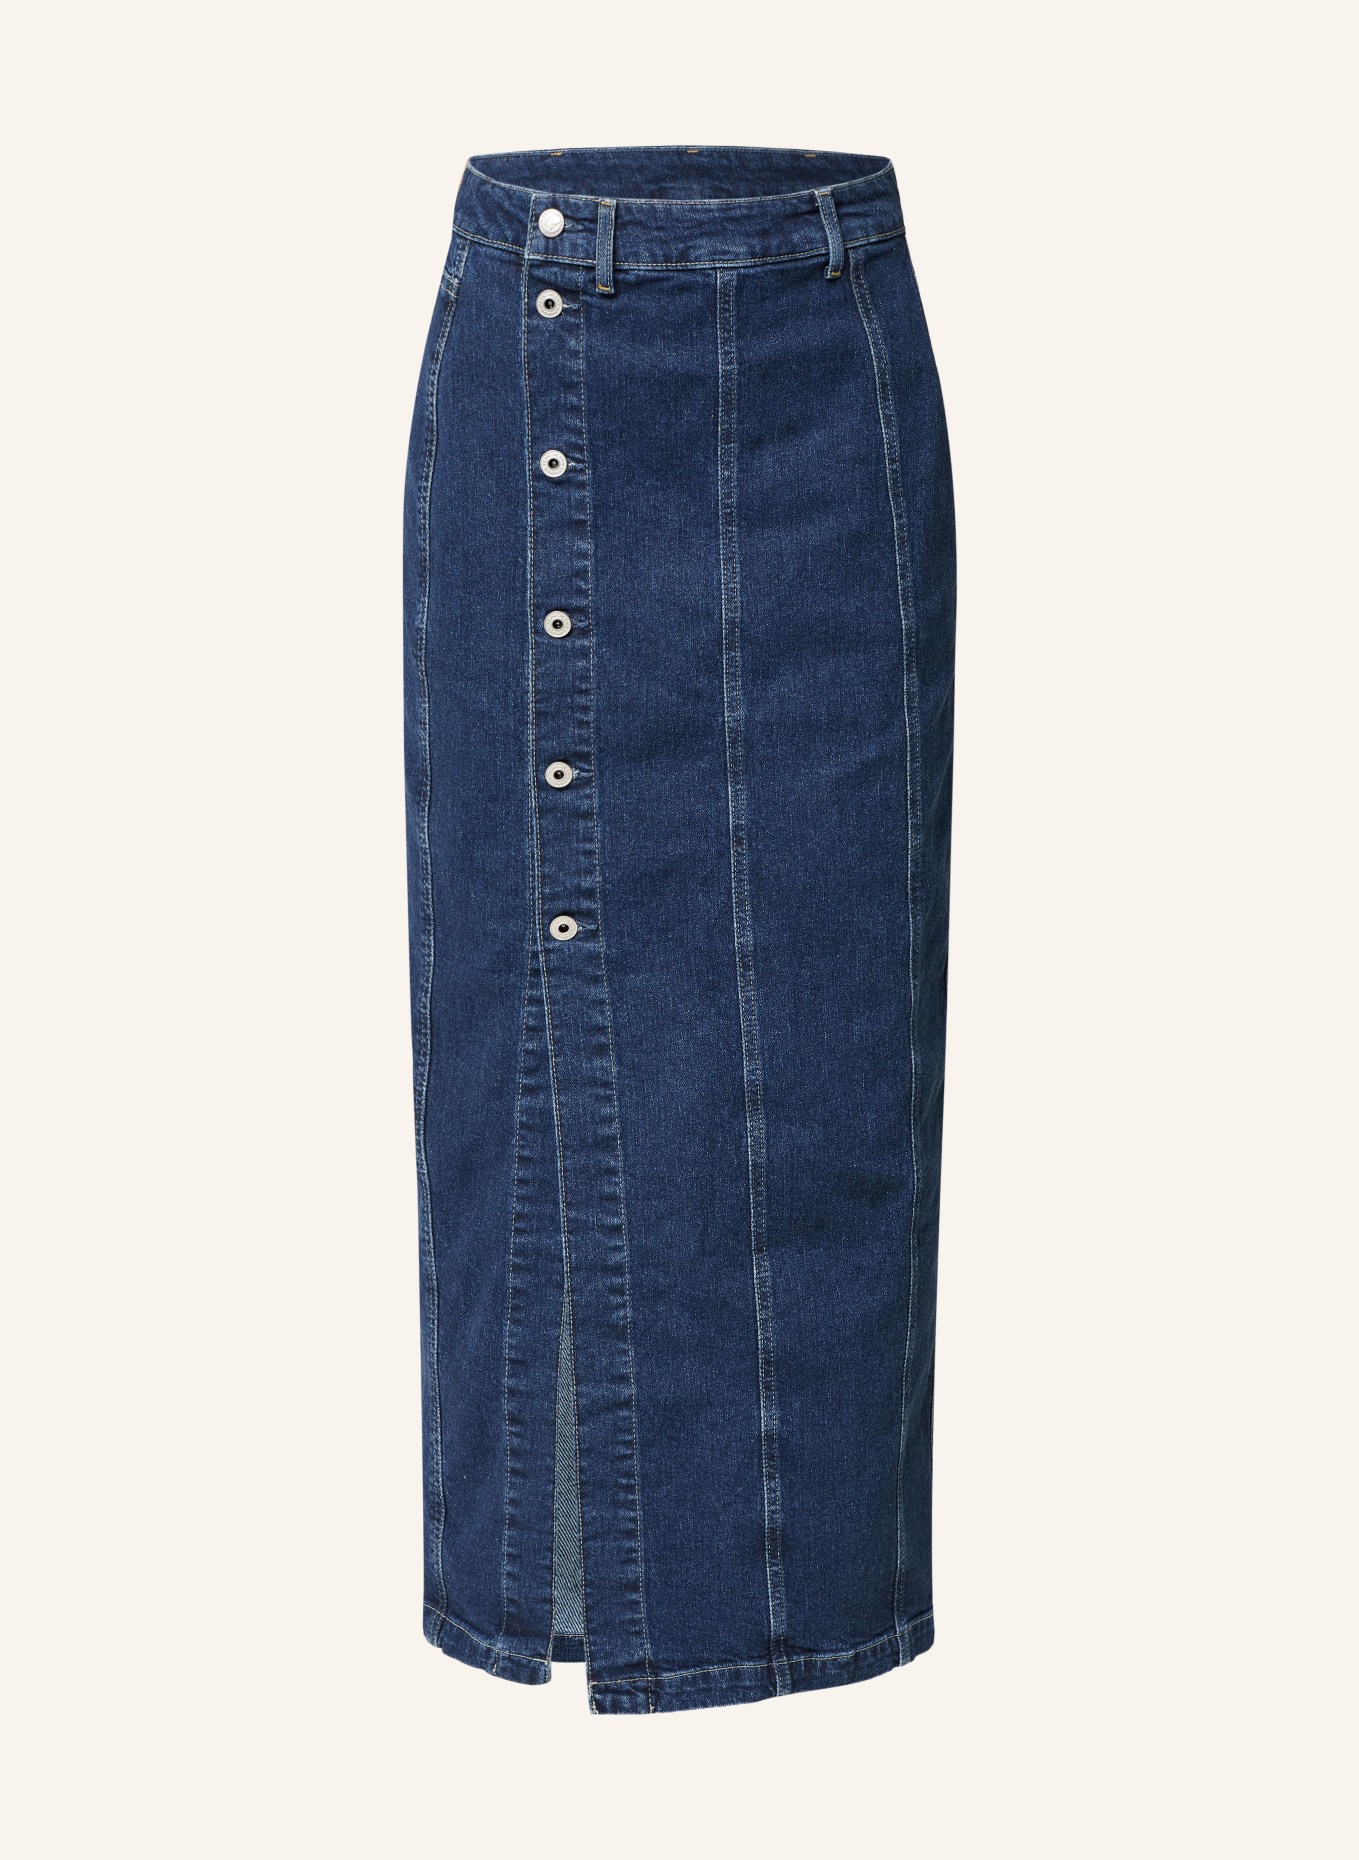 Pepe jeans TAYLOR Blue / Medium - Fast delivery | Spartoo Europe ! -  Clothing Skirts Women 66,40 €